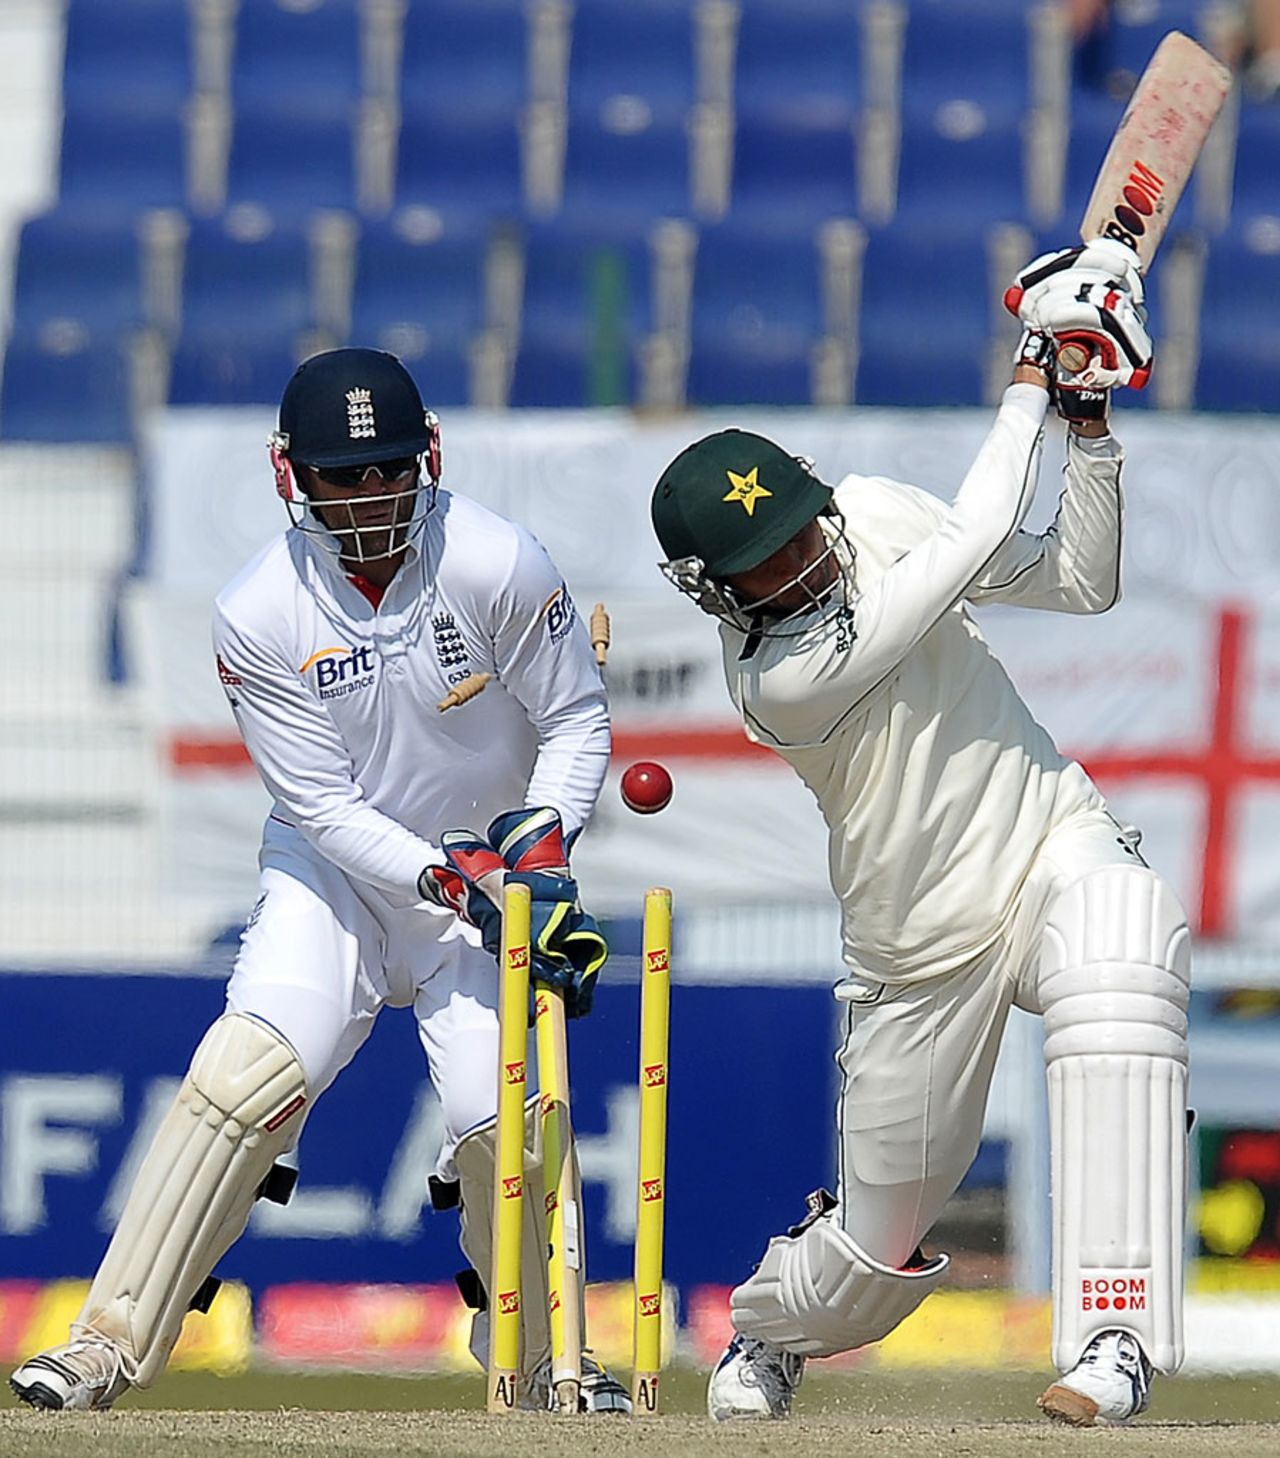 Junaid Khan swings and is bowled by Monty Panesar, Pakistan v England, 2nd Test, Abu Dhabi, 4th day, January 28, 2012